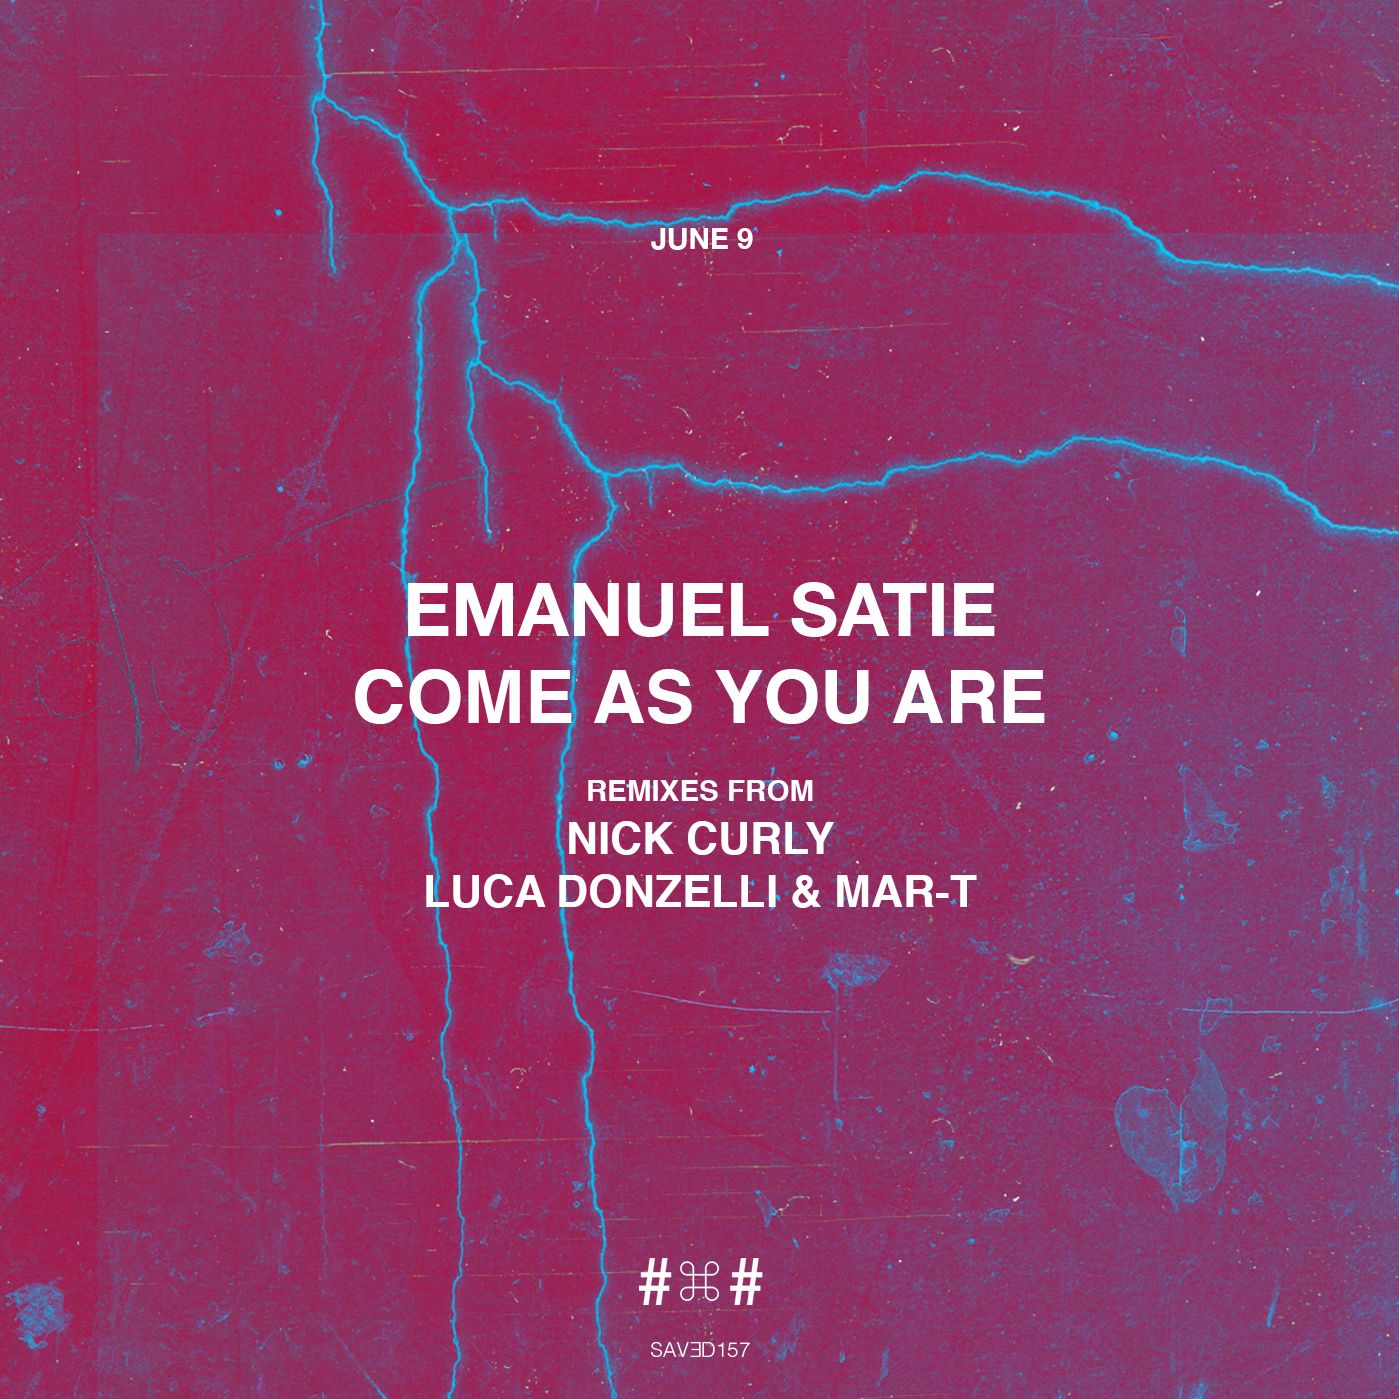 Sii mai Emanuel Satie - Come As You Are (Nick Curly Remix)